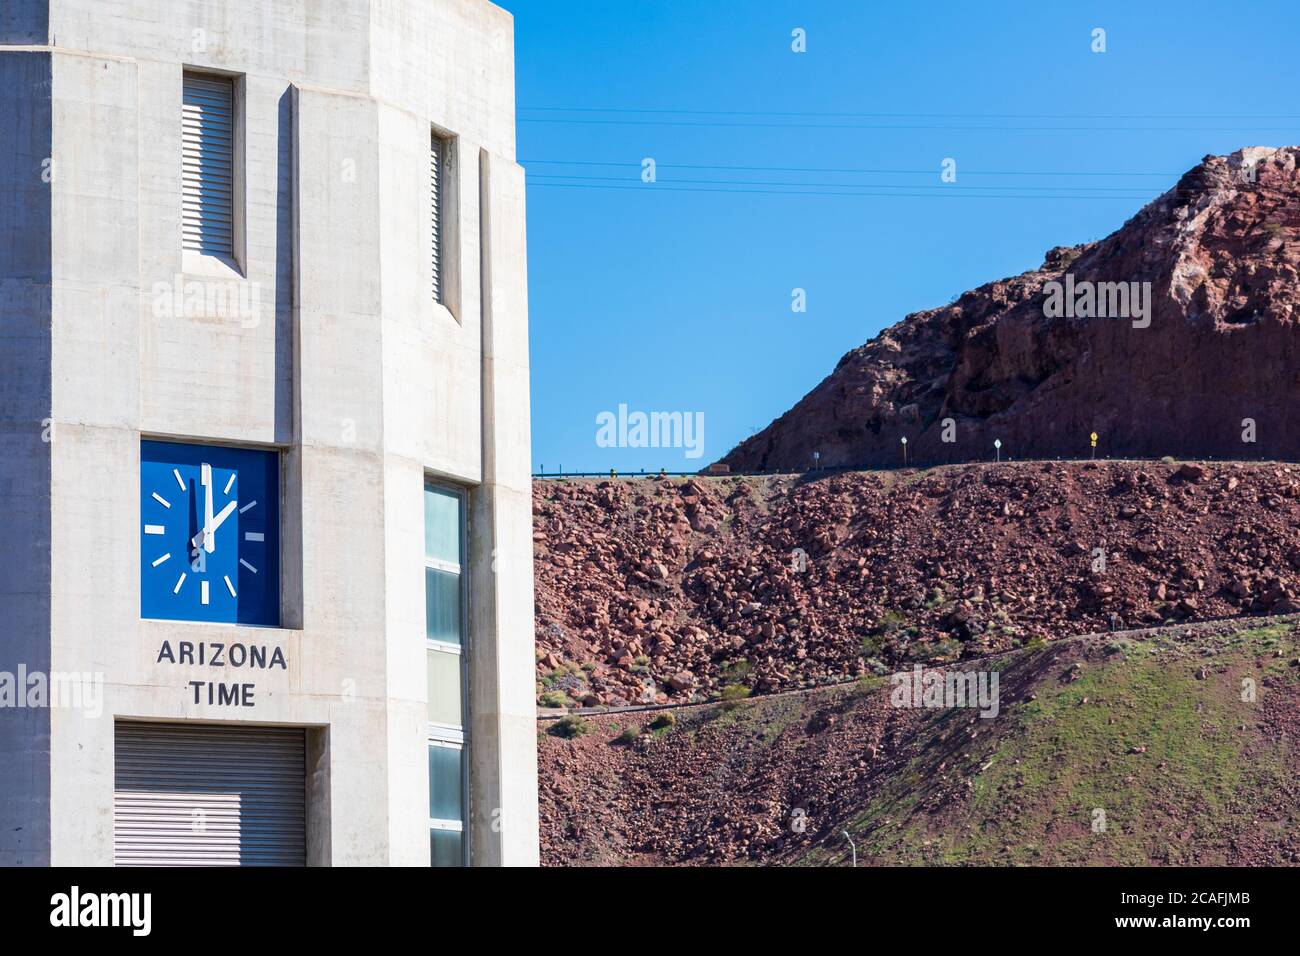 Water intake tower with a clock showing Arizona time on the Arizona side of the historic Hoover Dam. Rocky desert landscape background - Las Vegas, Ne Stock Photo